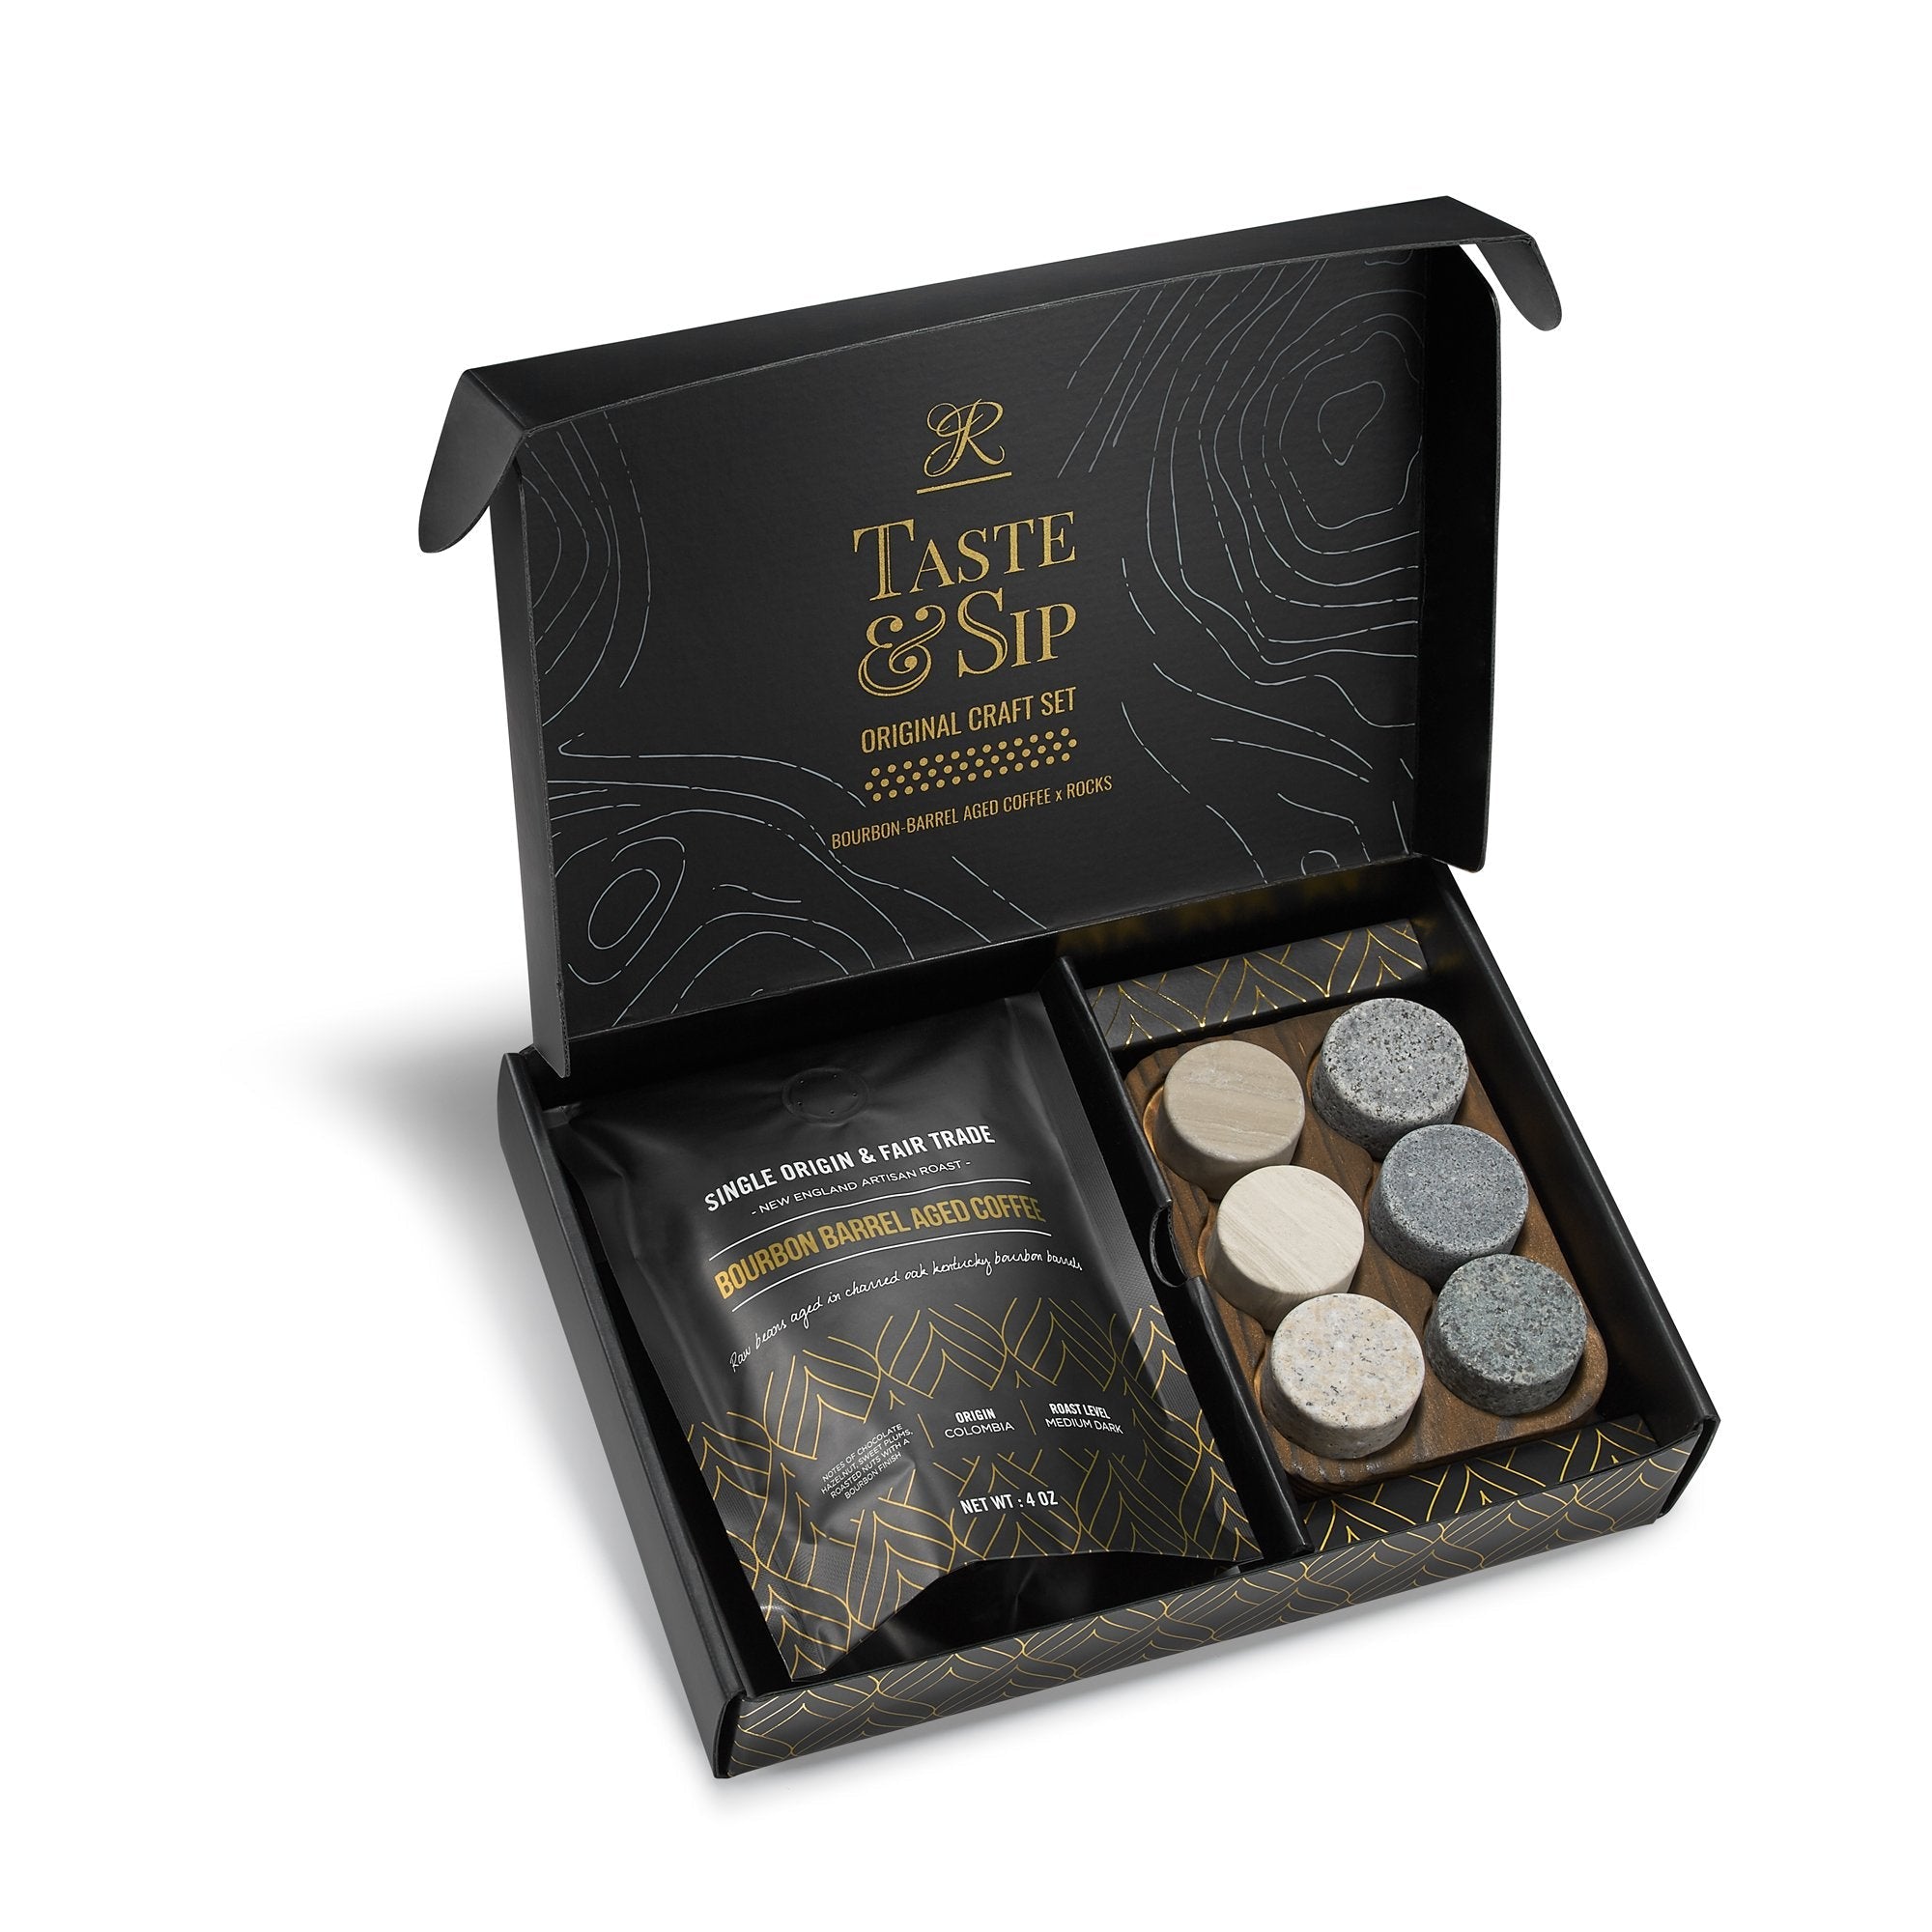 Whiskey Chilling Stones & Colombian Whisky Aged Coffee Gift Set